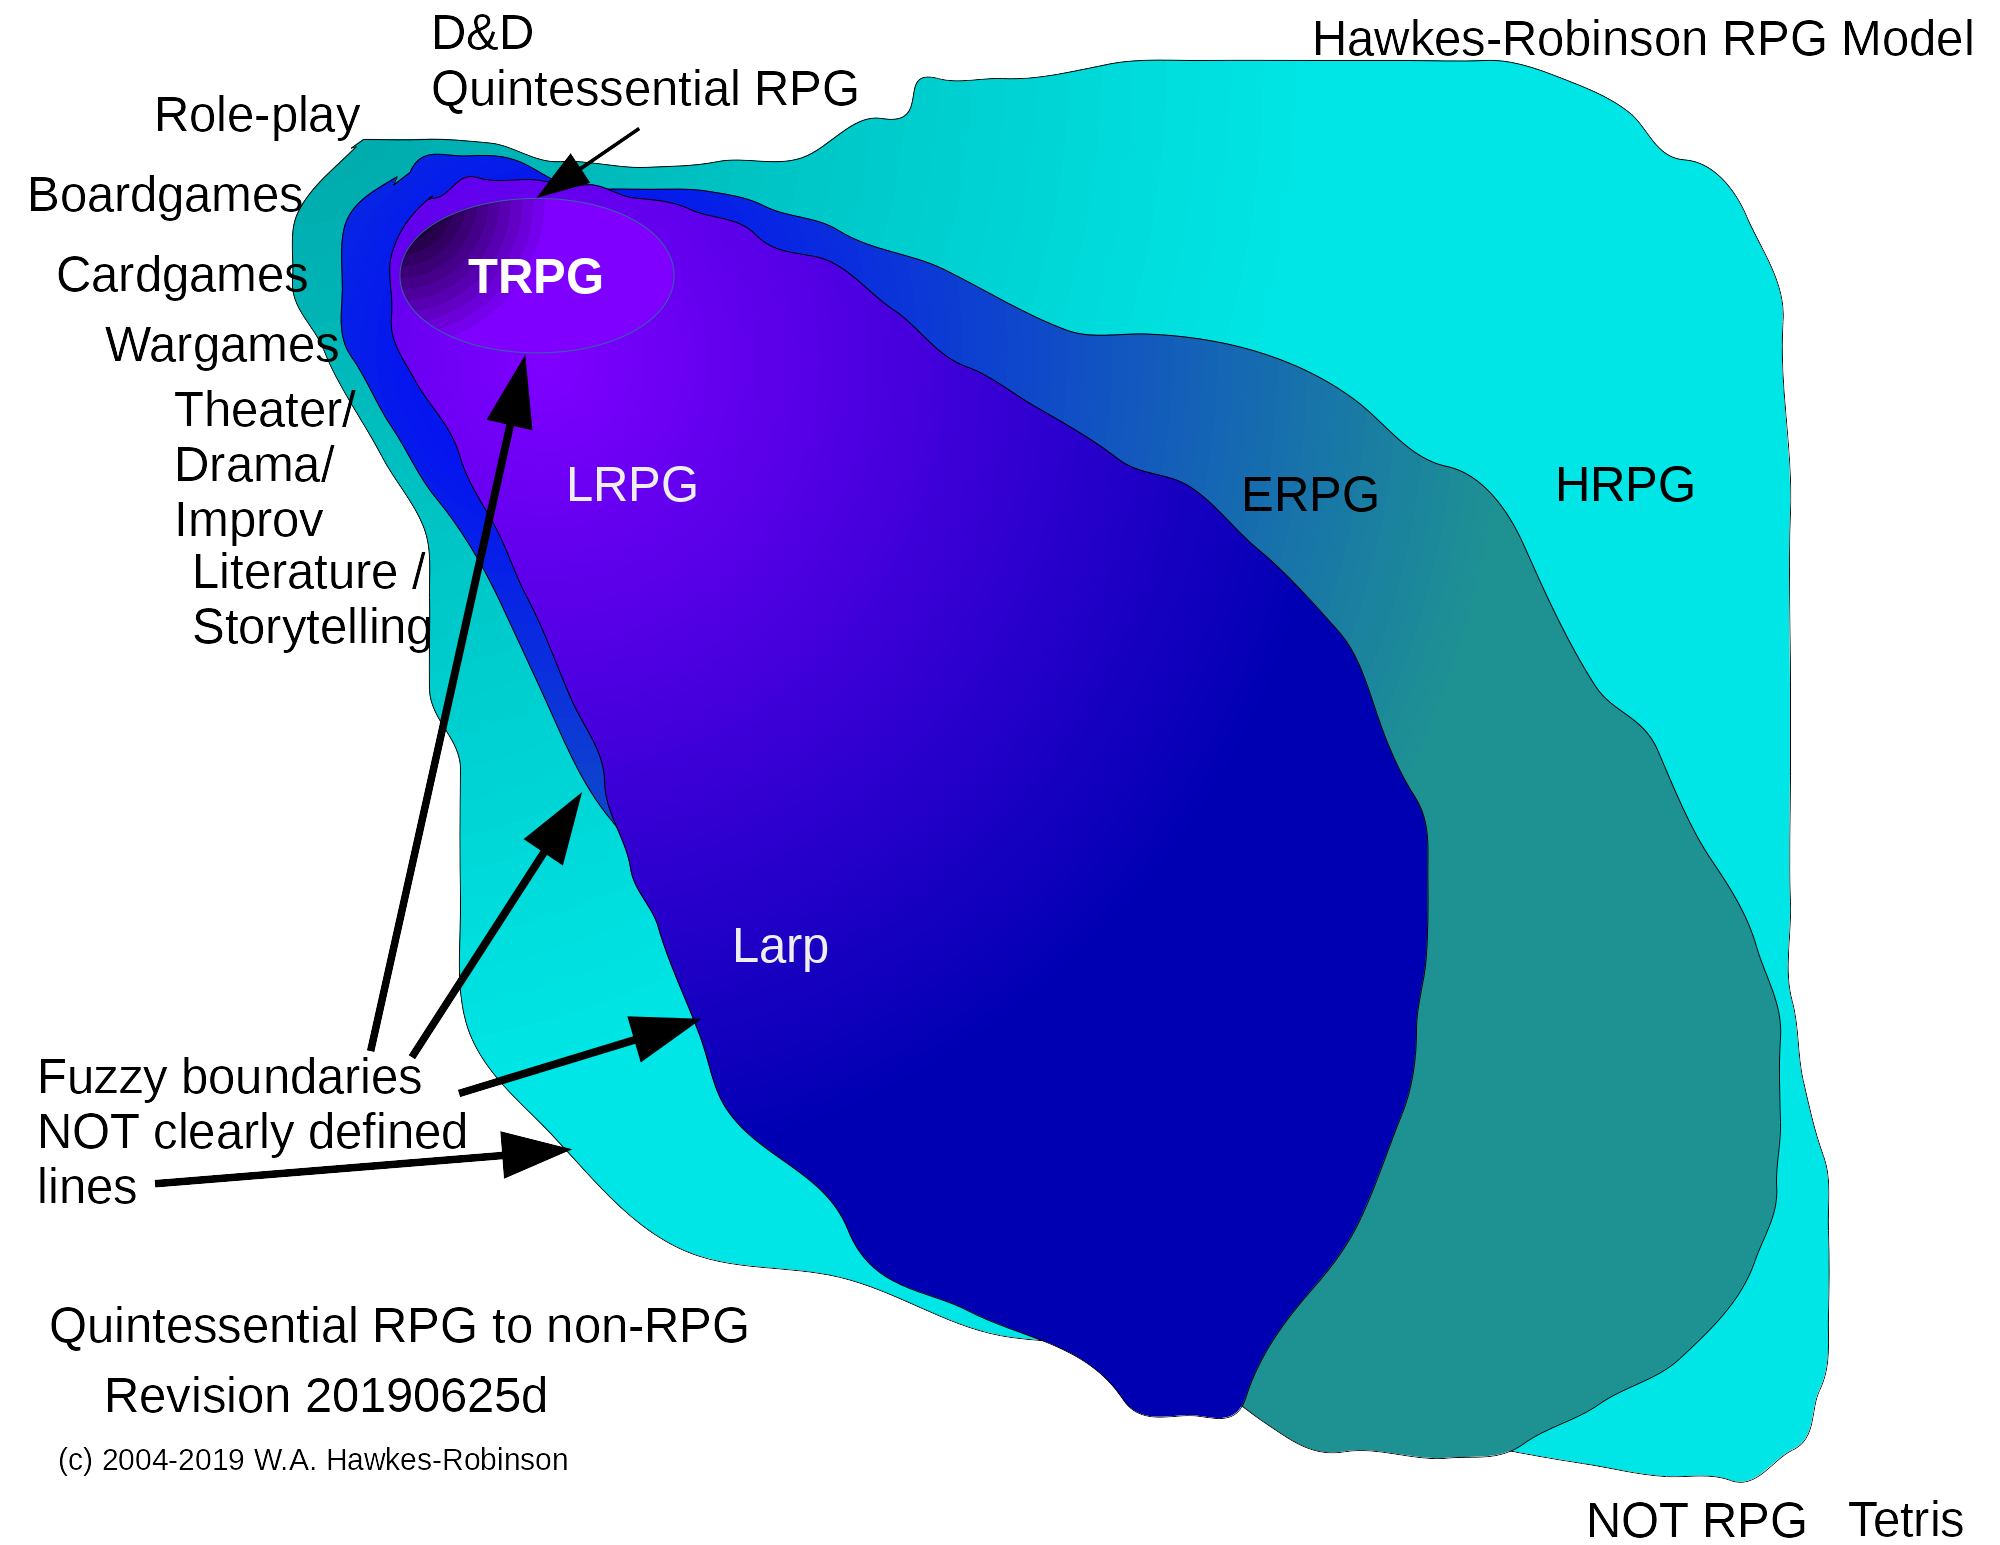 Hawkes-Robinson-RPG-Model-Quintessential-to-non-RPG-Fuzzy-Distinctions-Diagram-20190625d.png